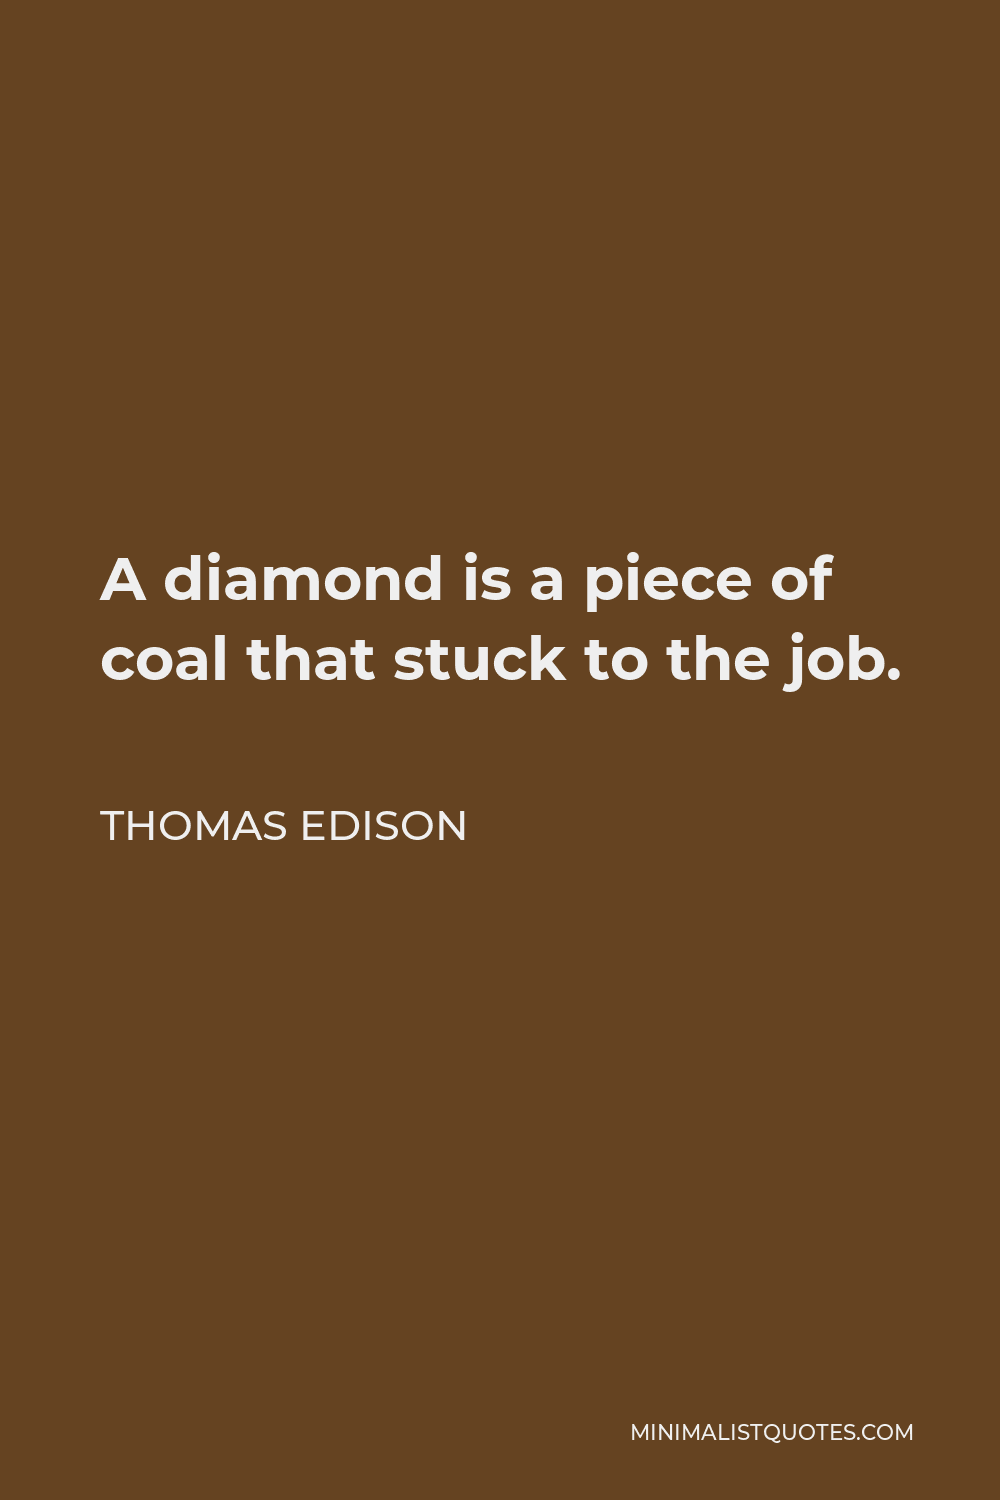 Thomas Edison Quote - A diamond is a piece of coal that stuck to the job.